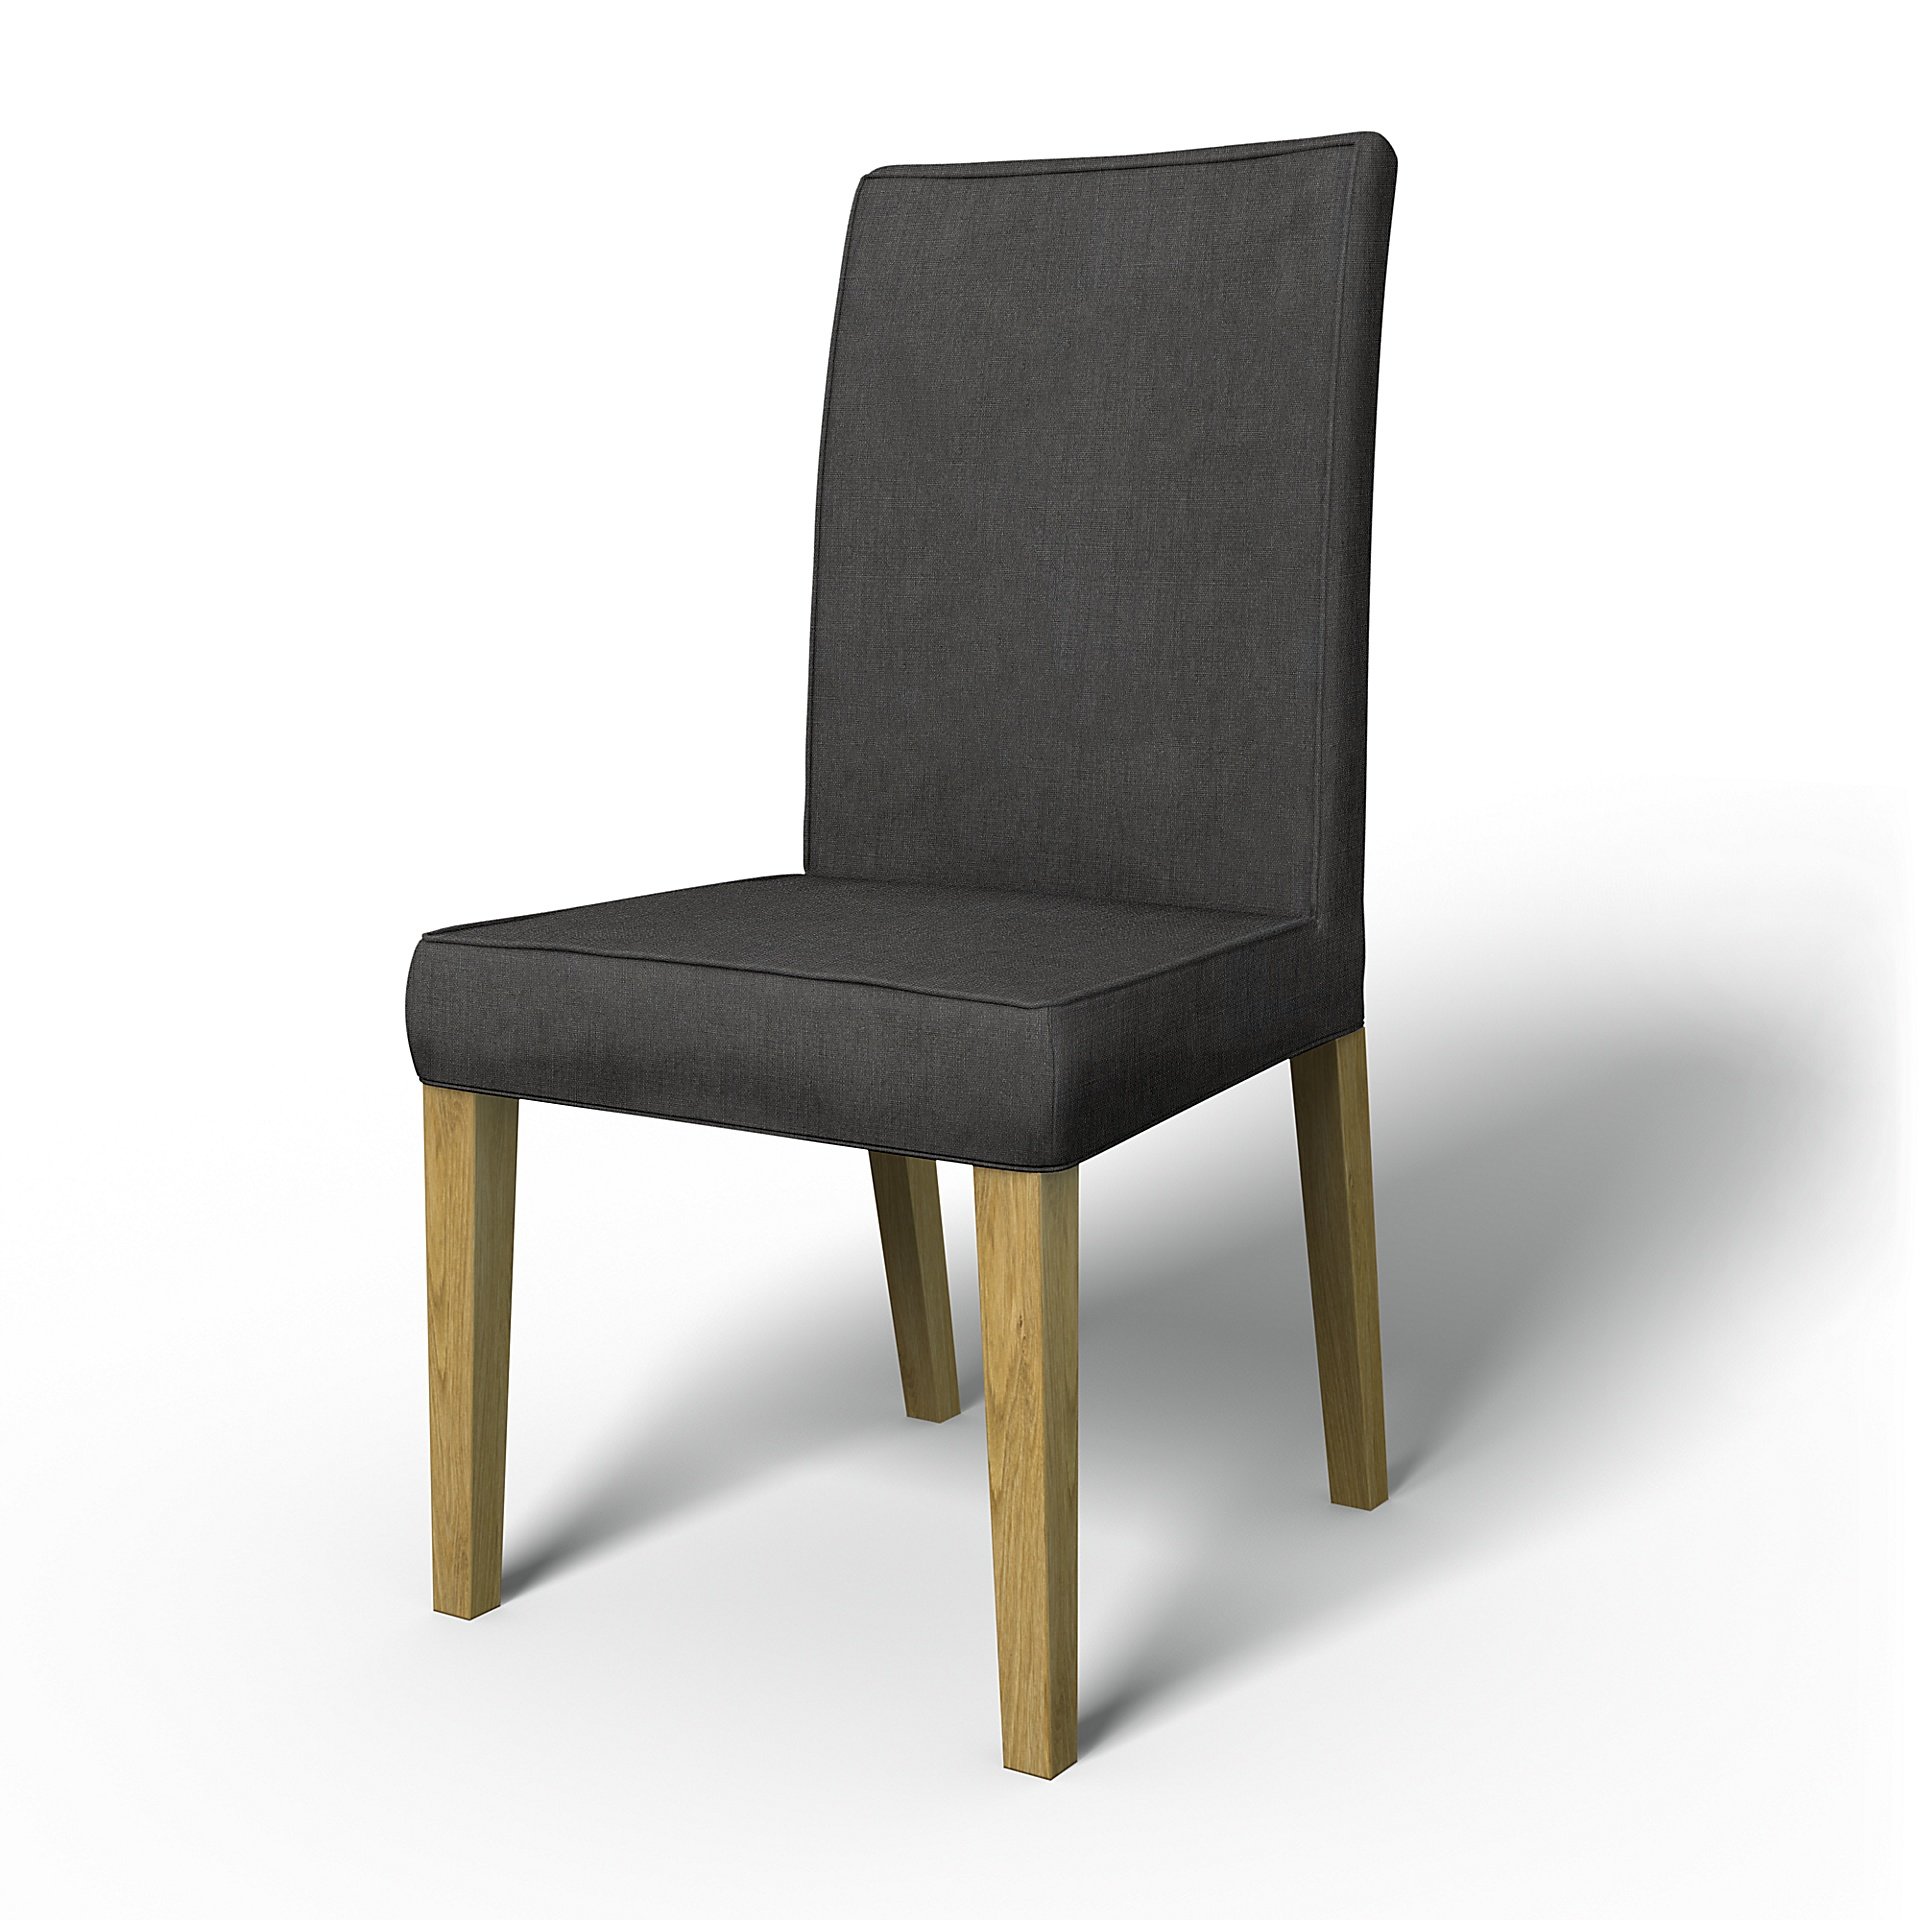 IKEA - Henriksdal Dining Chair Cover with piping (Standard model), Espresso, Linen - Bemz